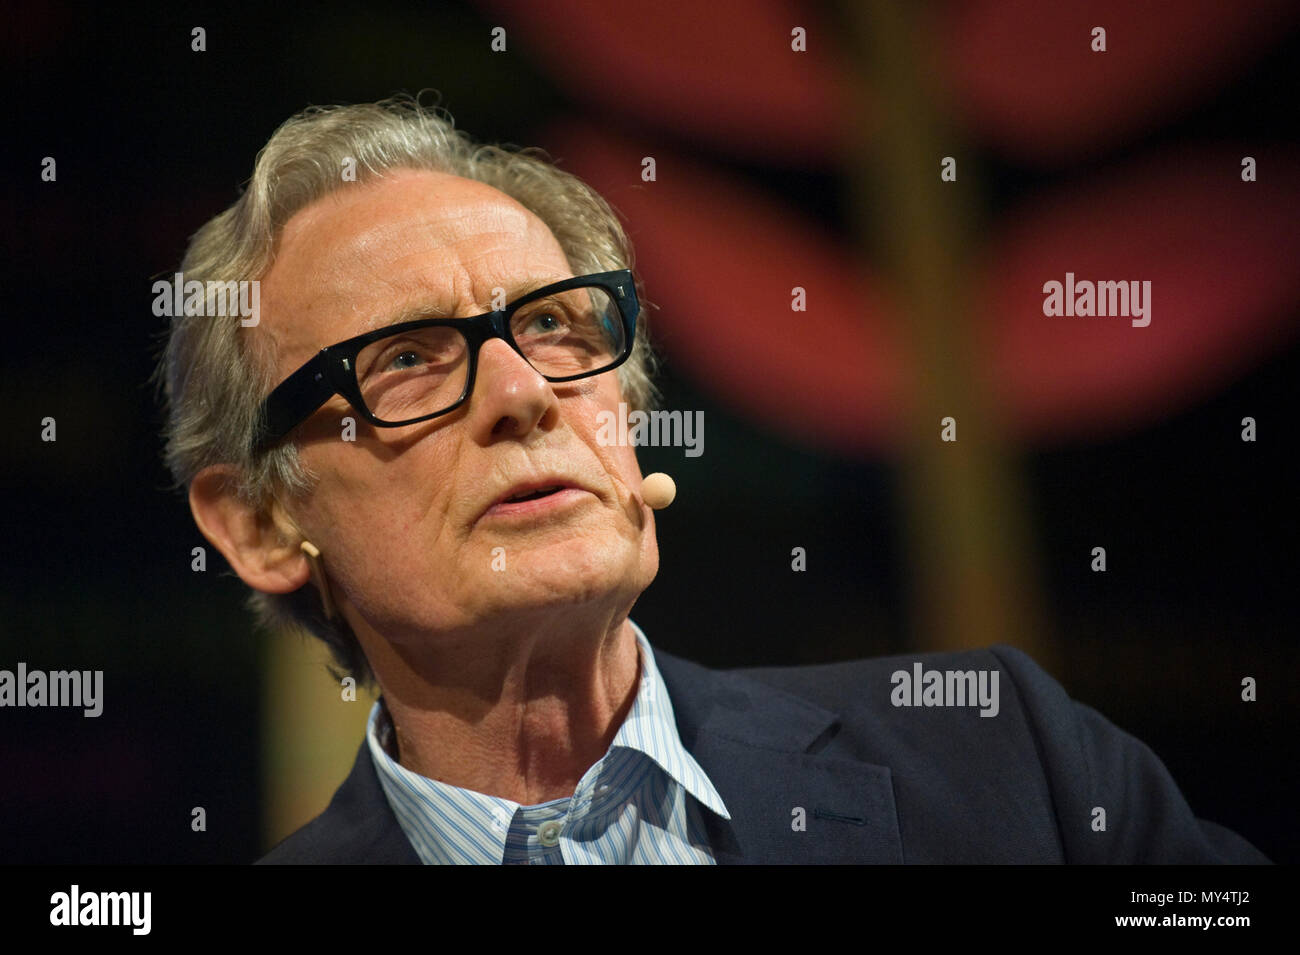 Bill Nighy speaking on stage at Hay Festival 2018 Hay-on-Wye Powys Wales UK Stock Photo